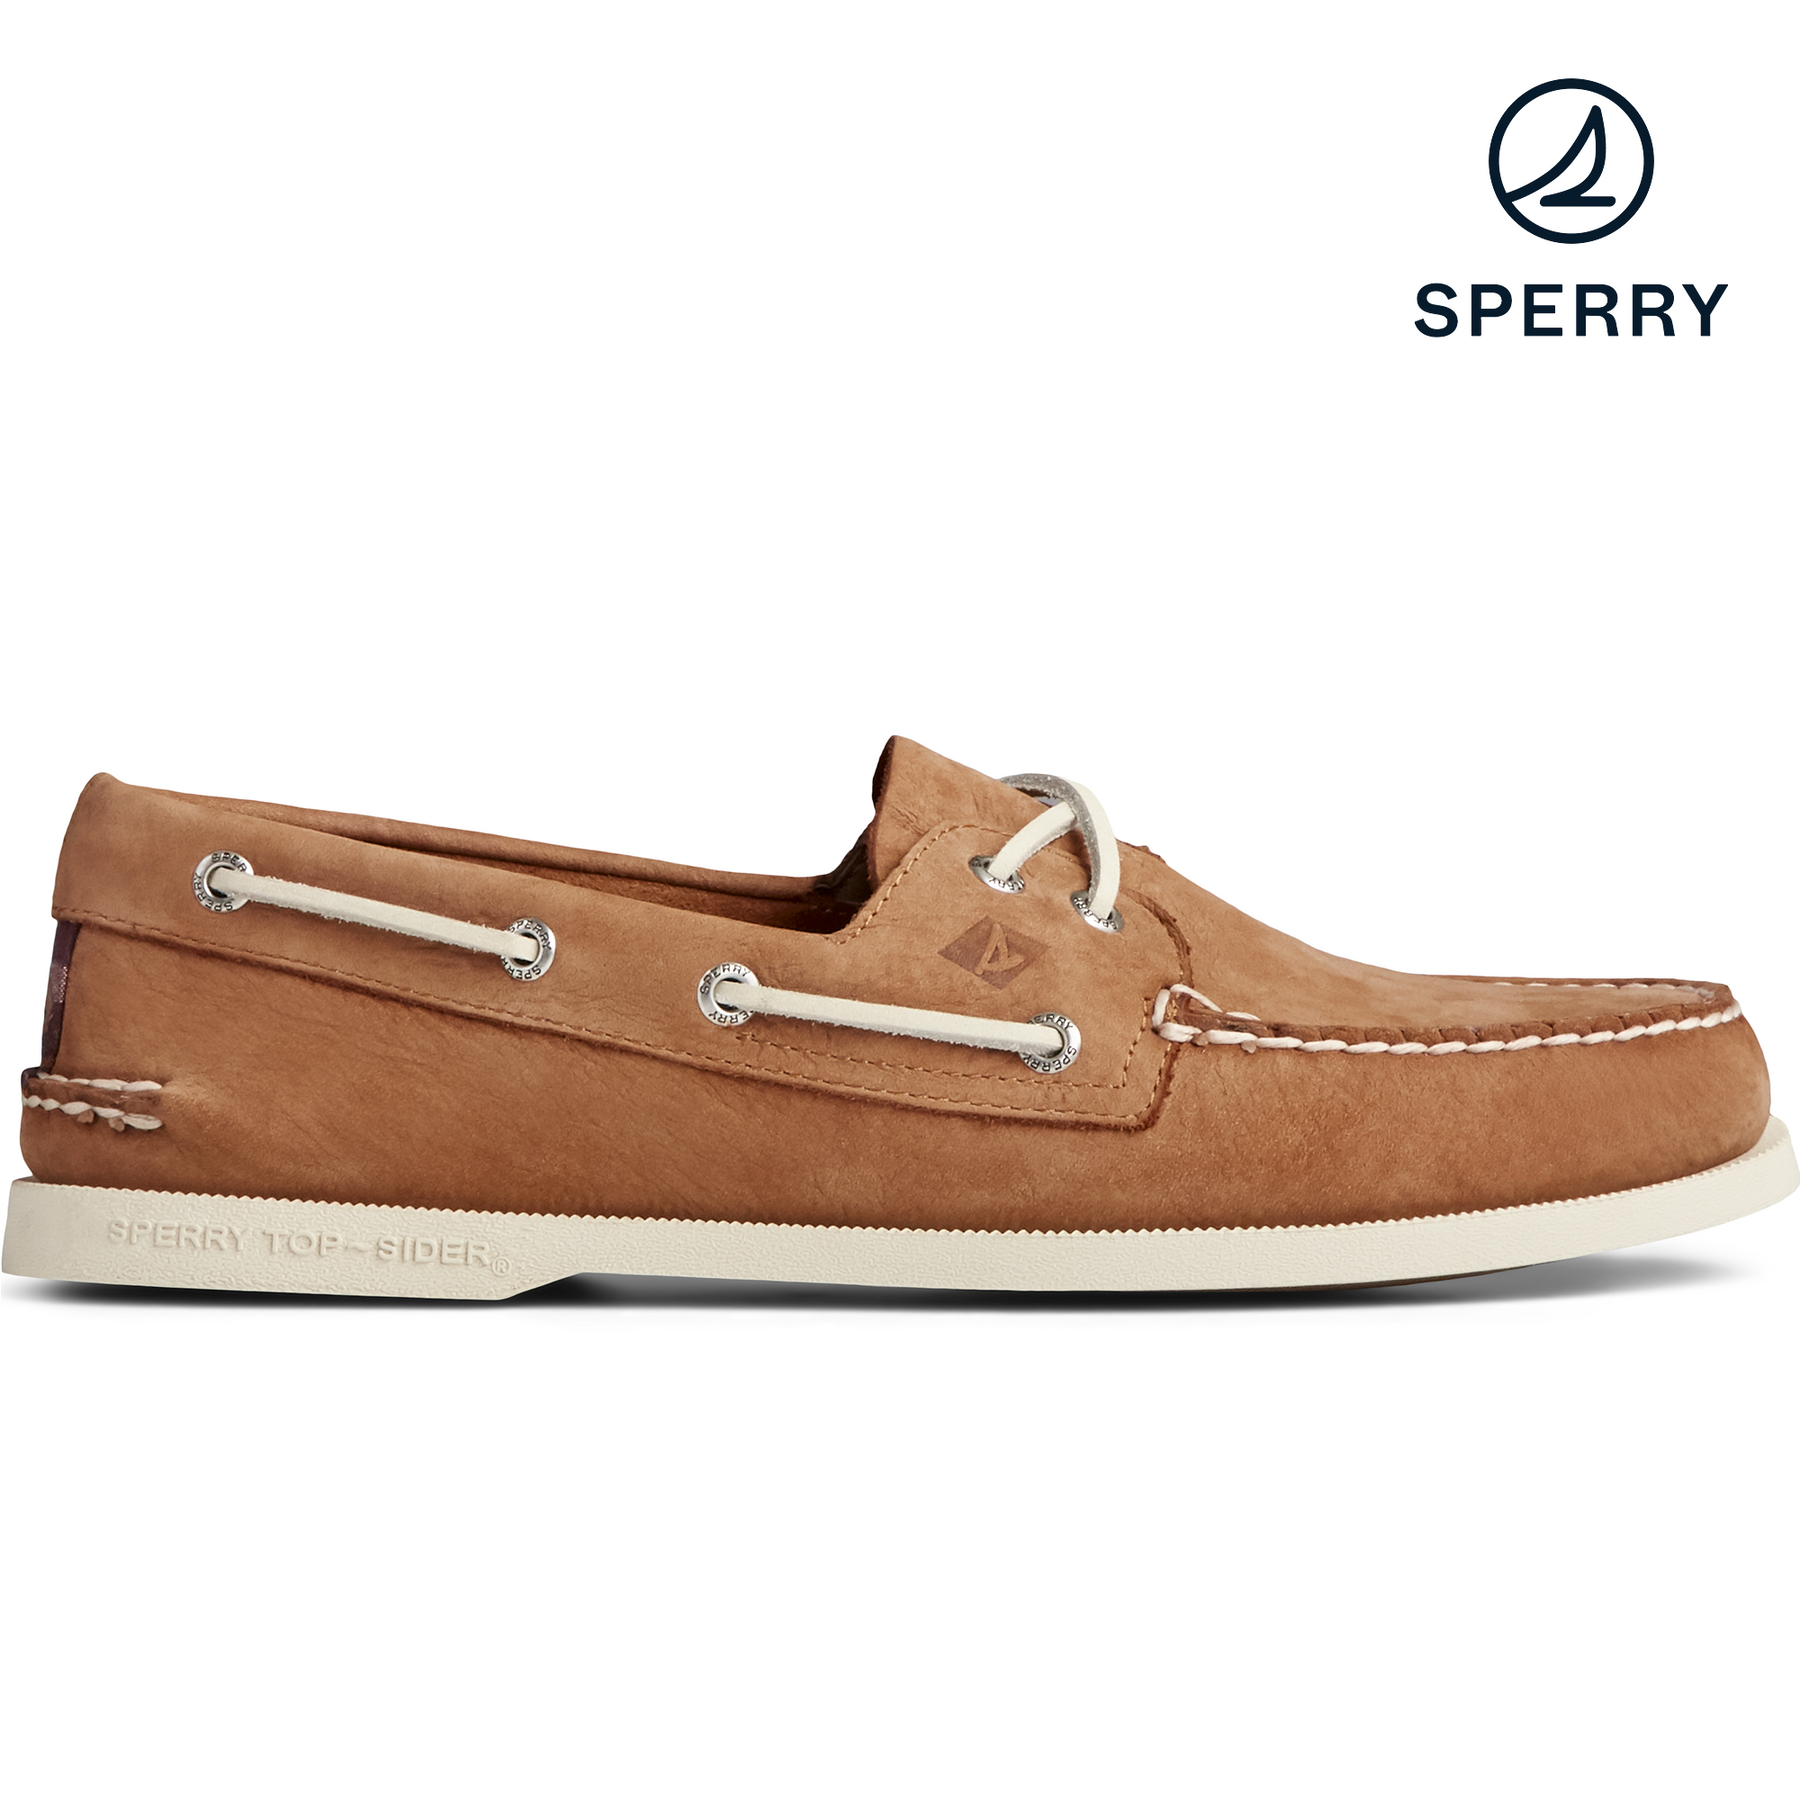 Men's Sperry, Authentic Surf Leather Tan Boat Shoe (STS227923)